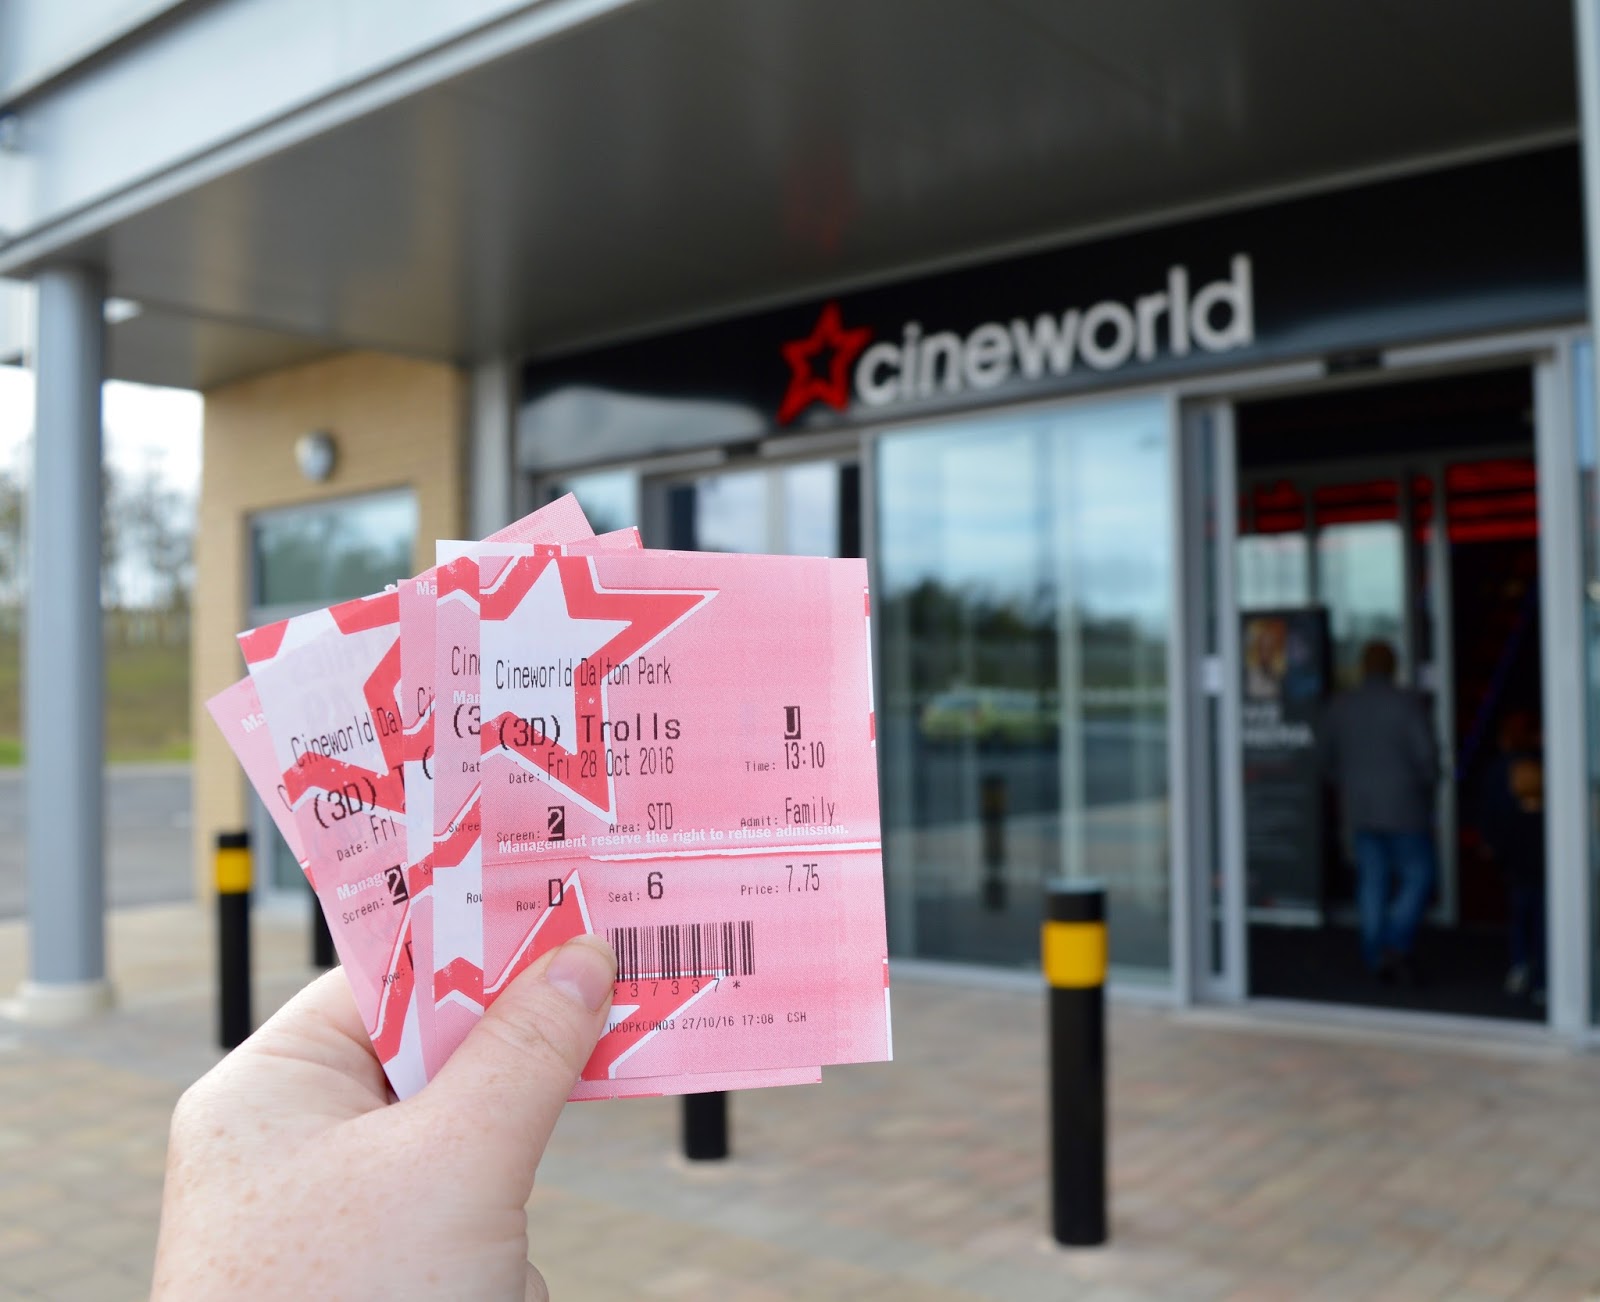 New Cineworld Cinema & Family Restaurants at Dalton Park Retail Outlet in County Durham (Just off A19) - Cineworld tickets